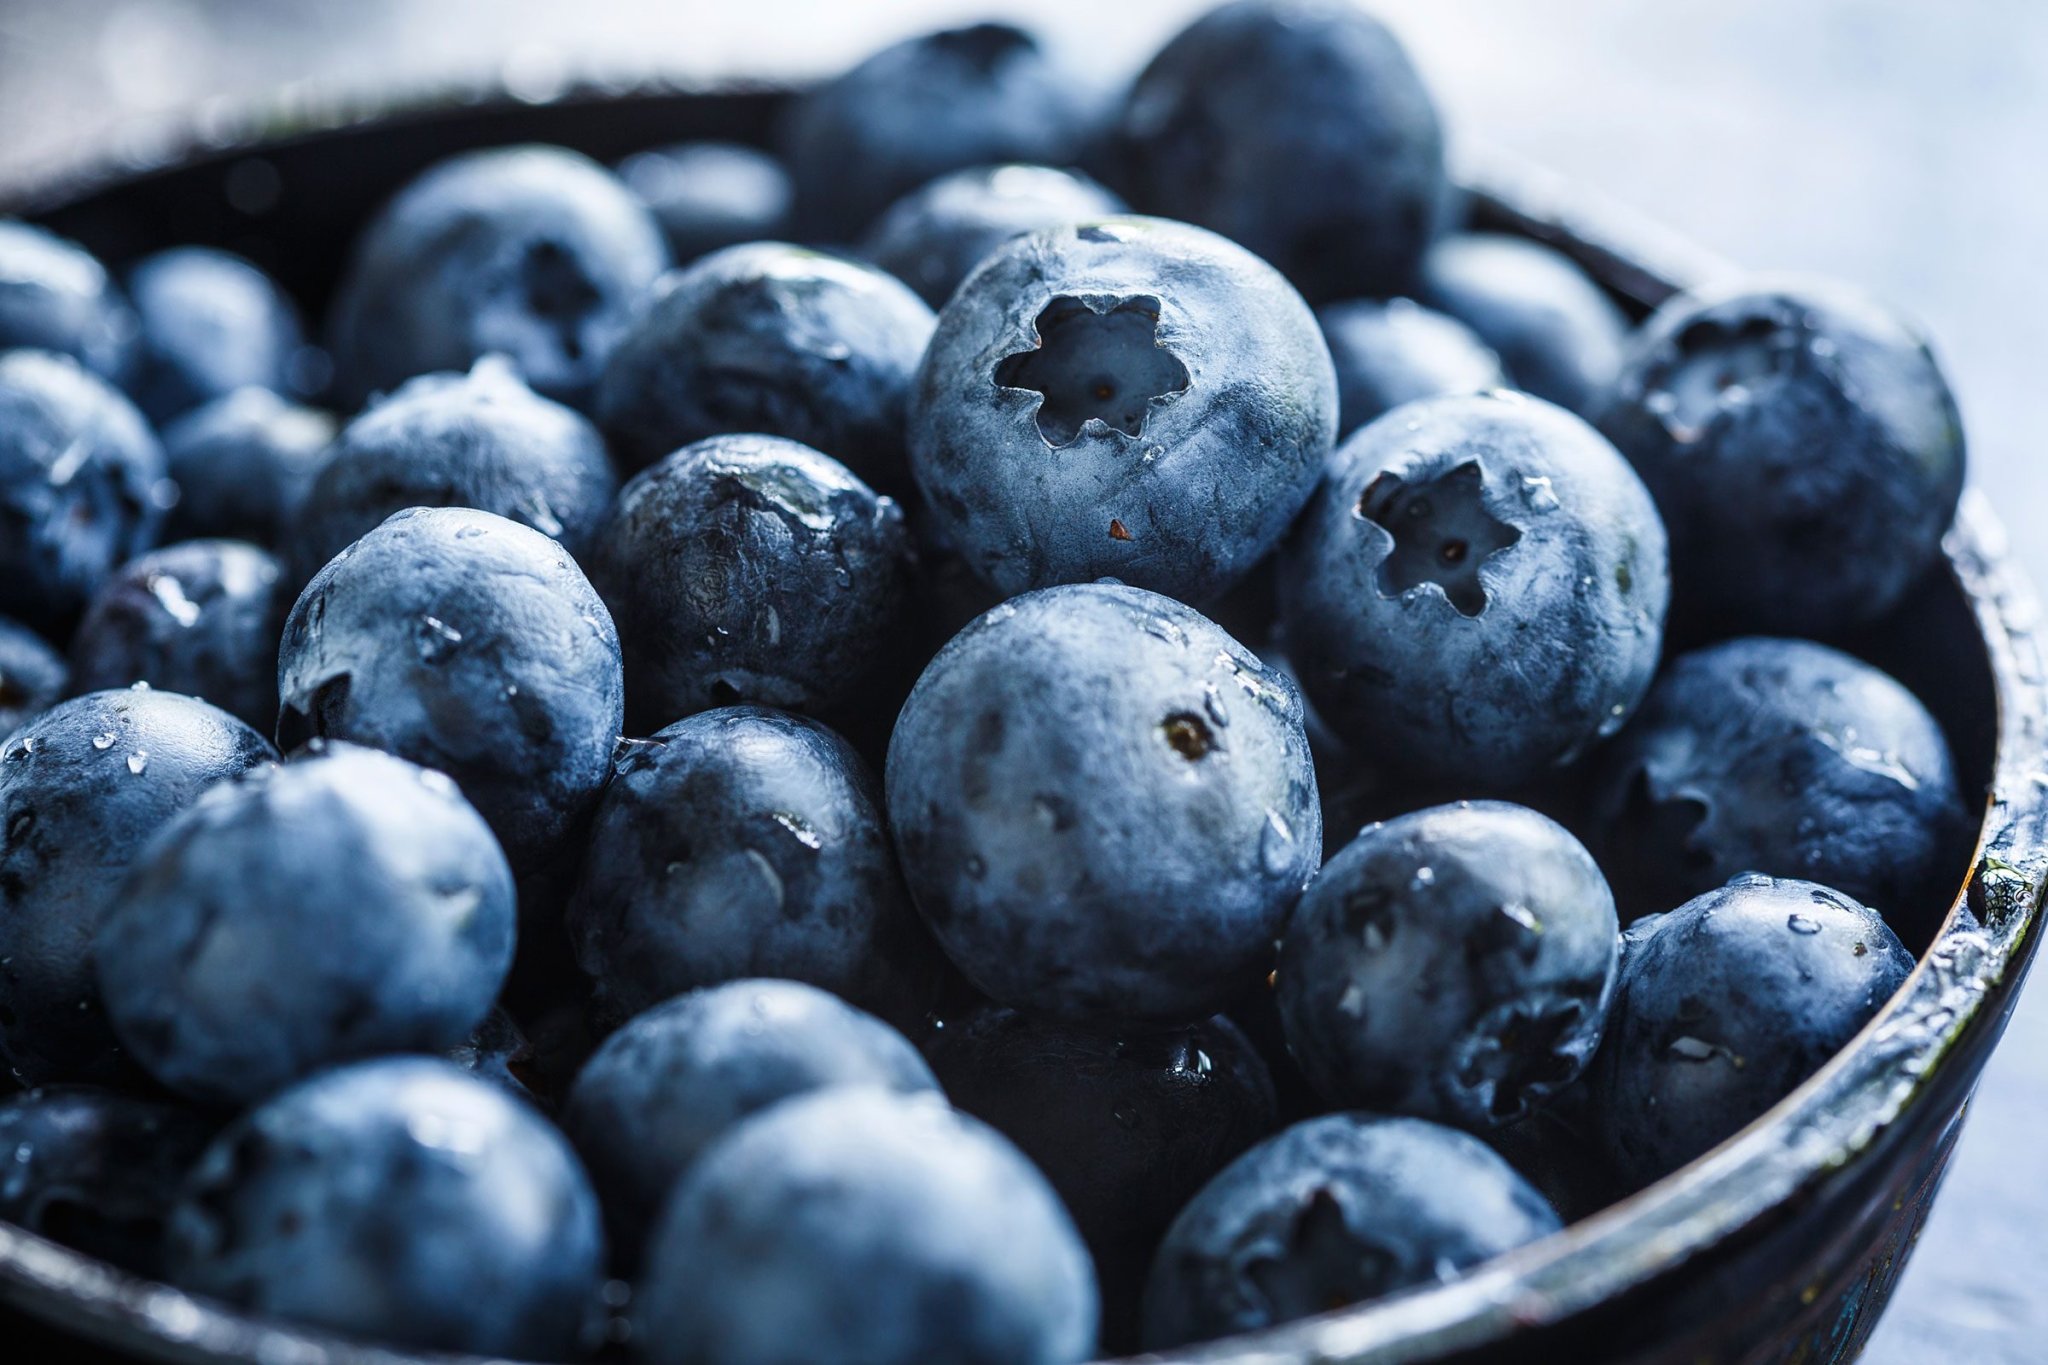 How to Make These 8 Superfoods Even Healthier